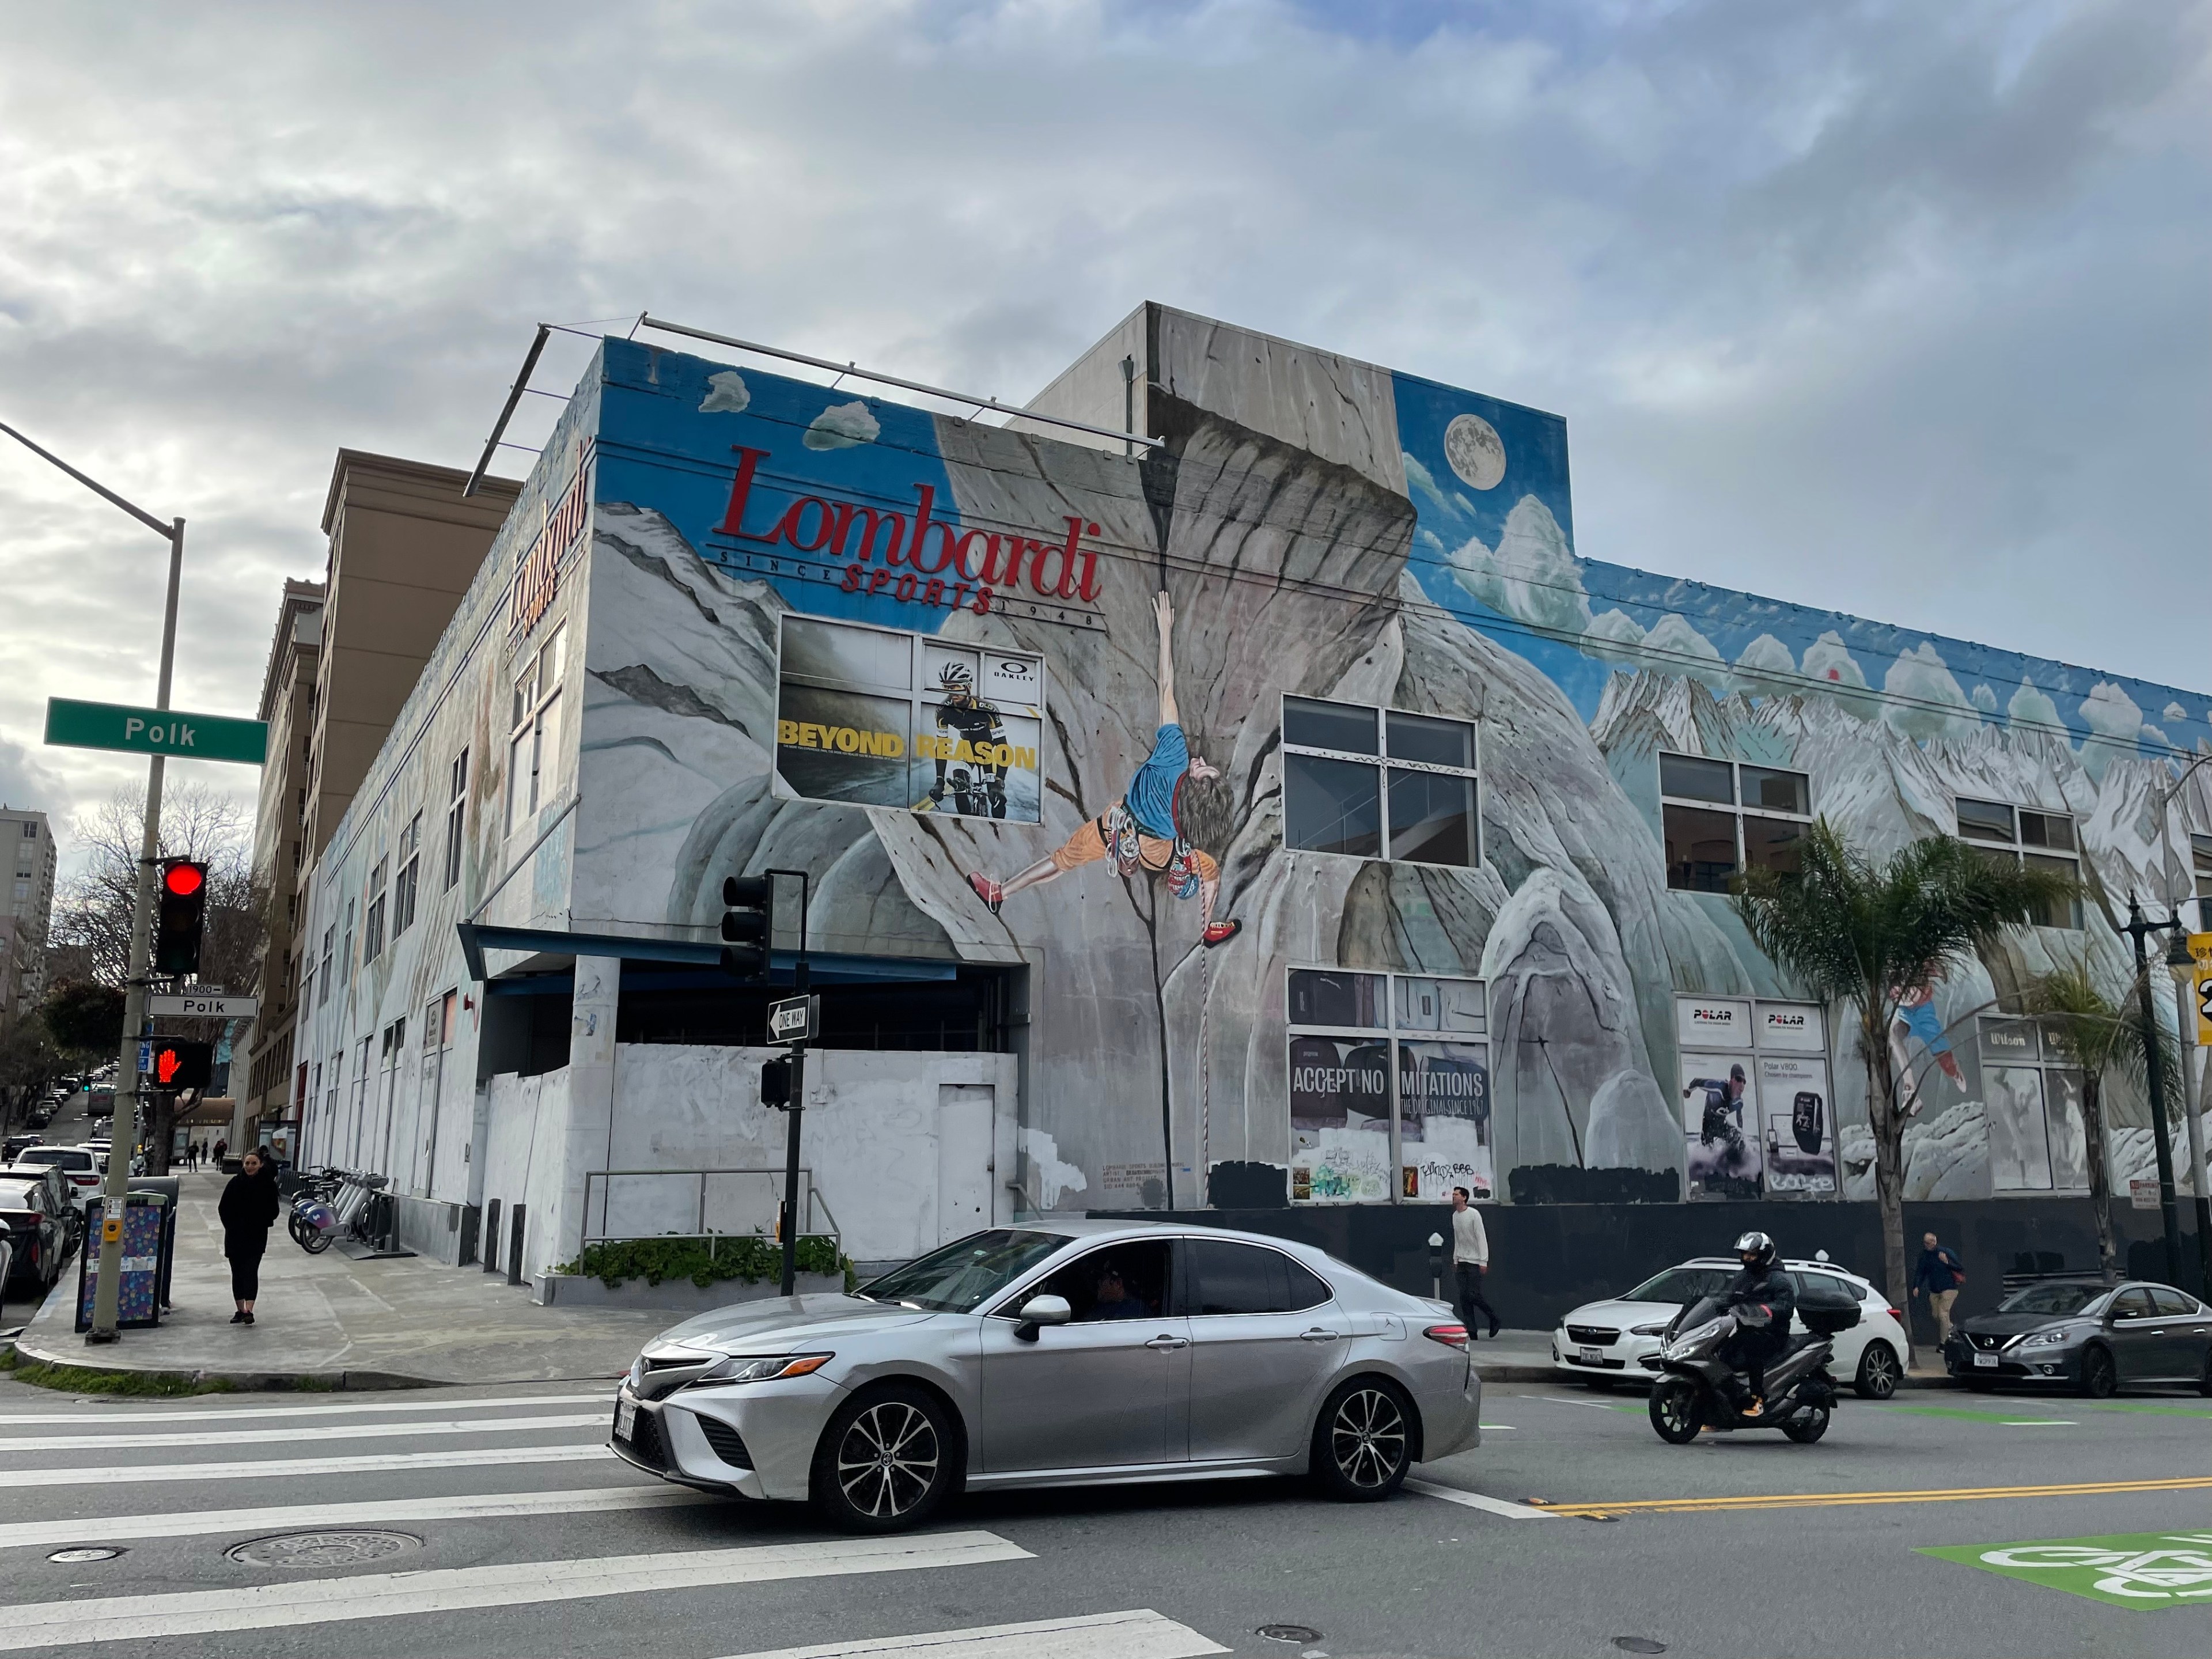 Cars pass in front of a large, empty retail building covered in a mural depicting winter sports.